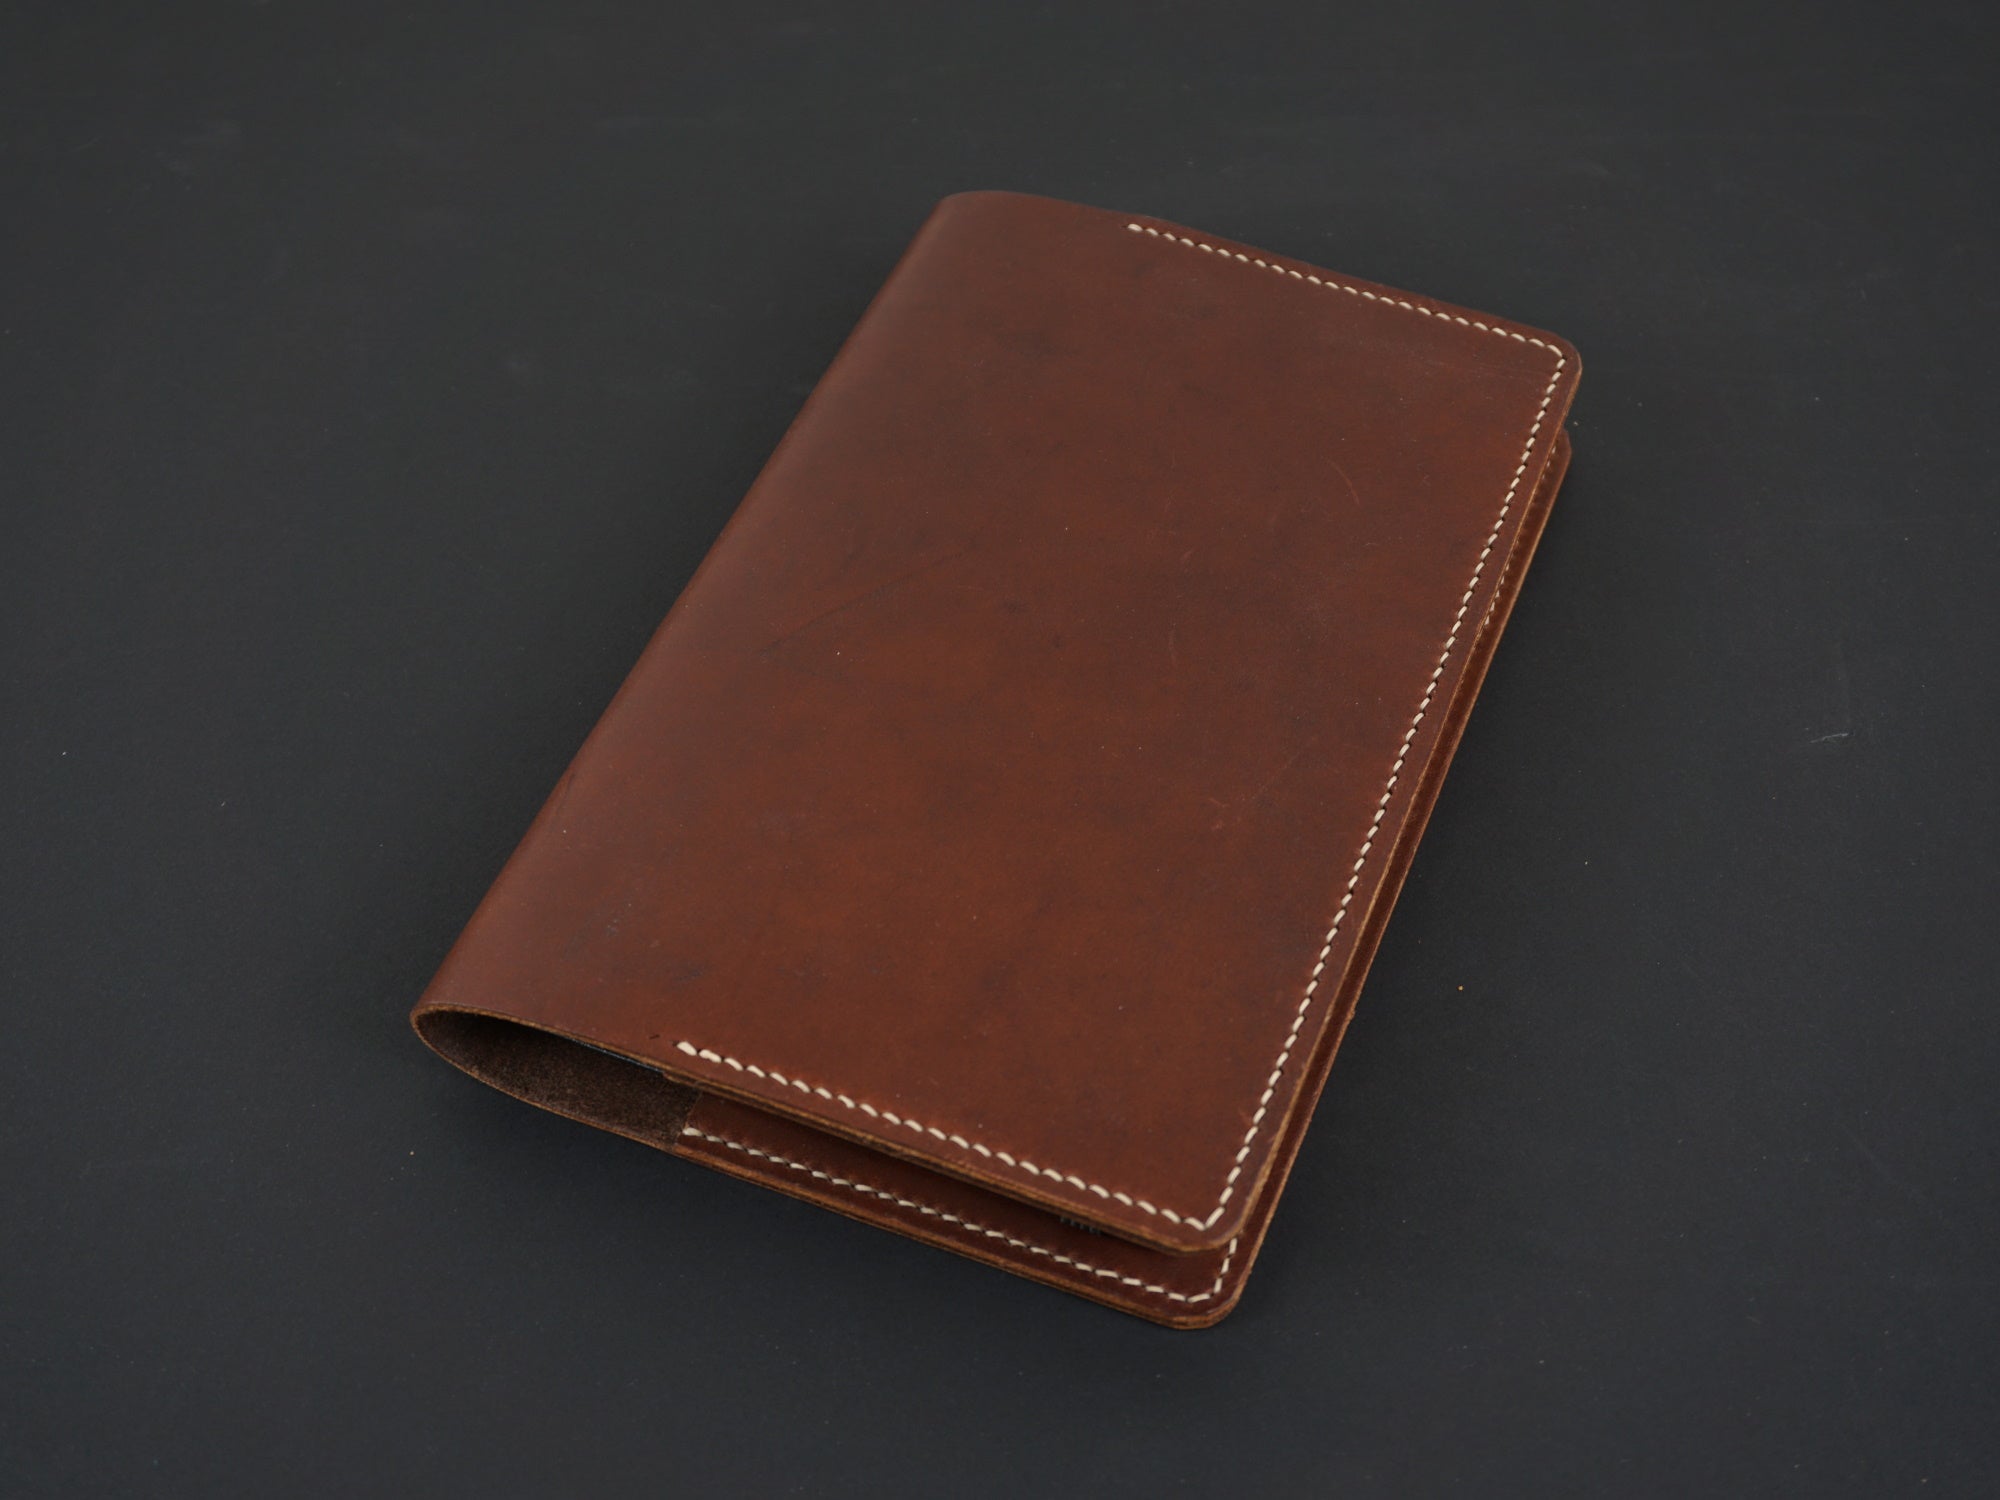 Tempesti leather notebook cover